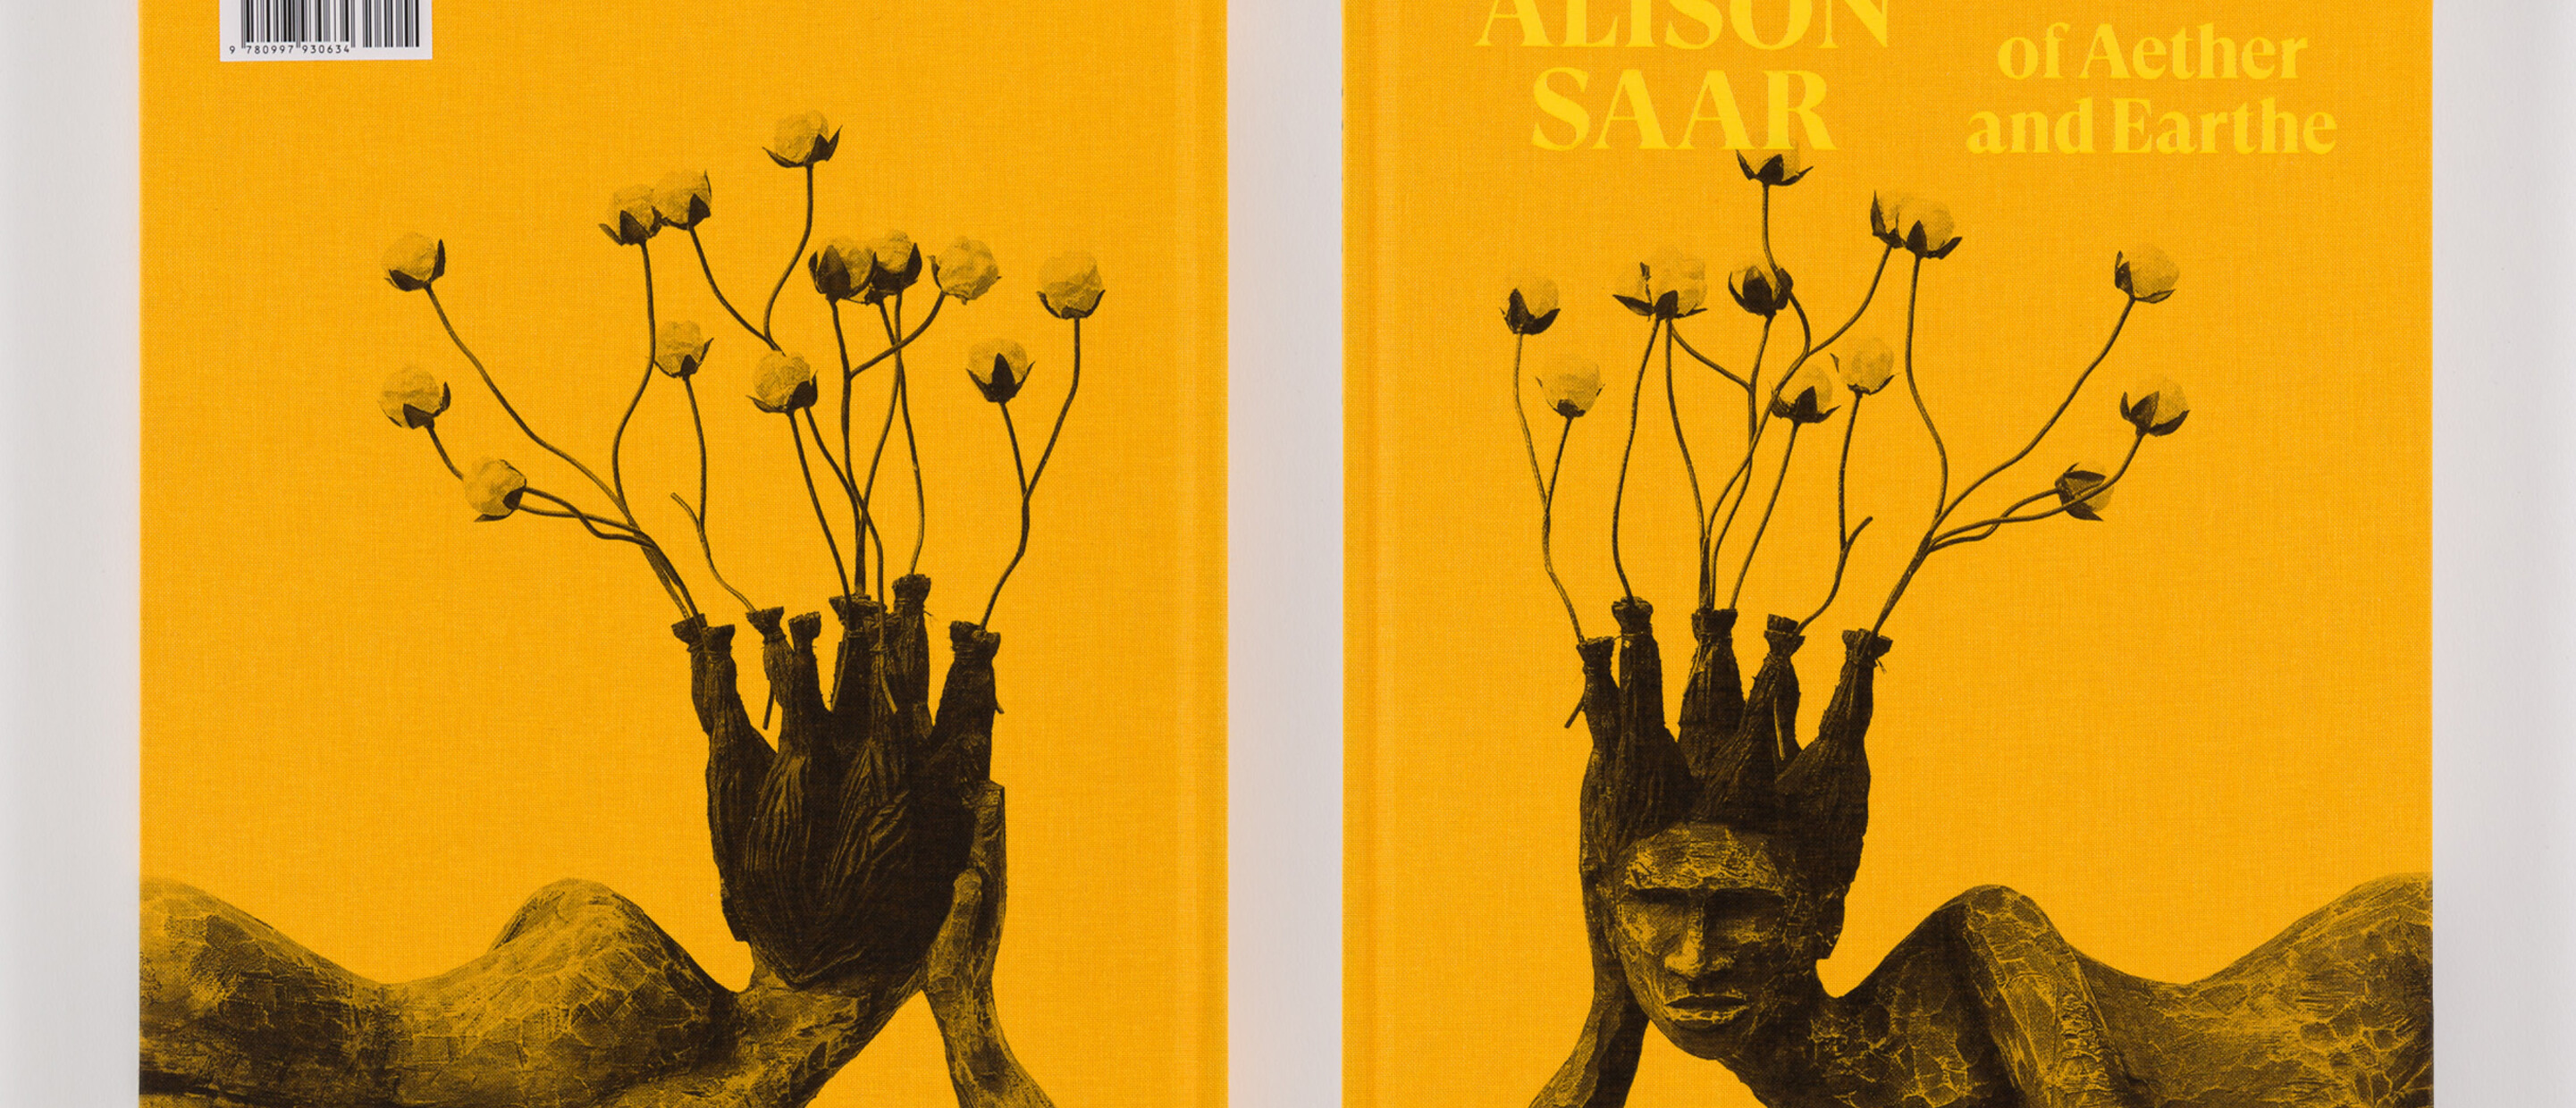 Photograph of both sides of a book titled Alison Saar: Of Aether and Earthe with image of sculpture front and back